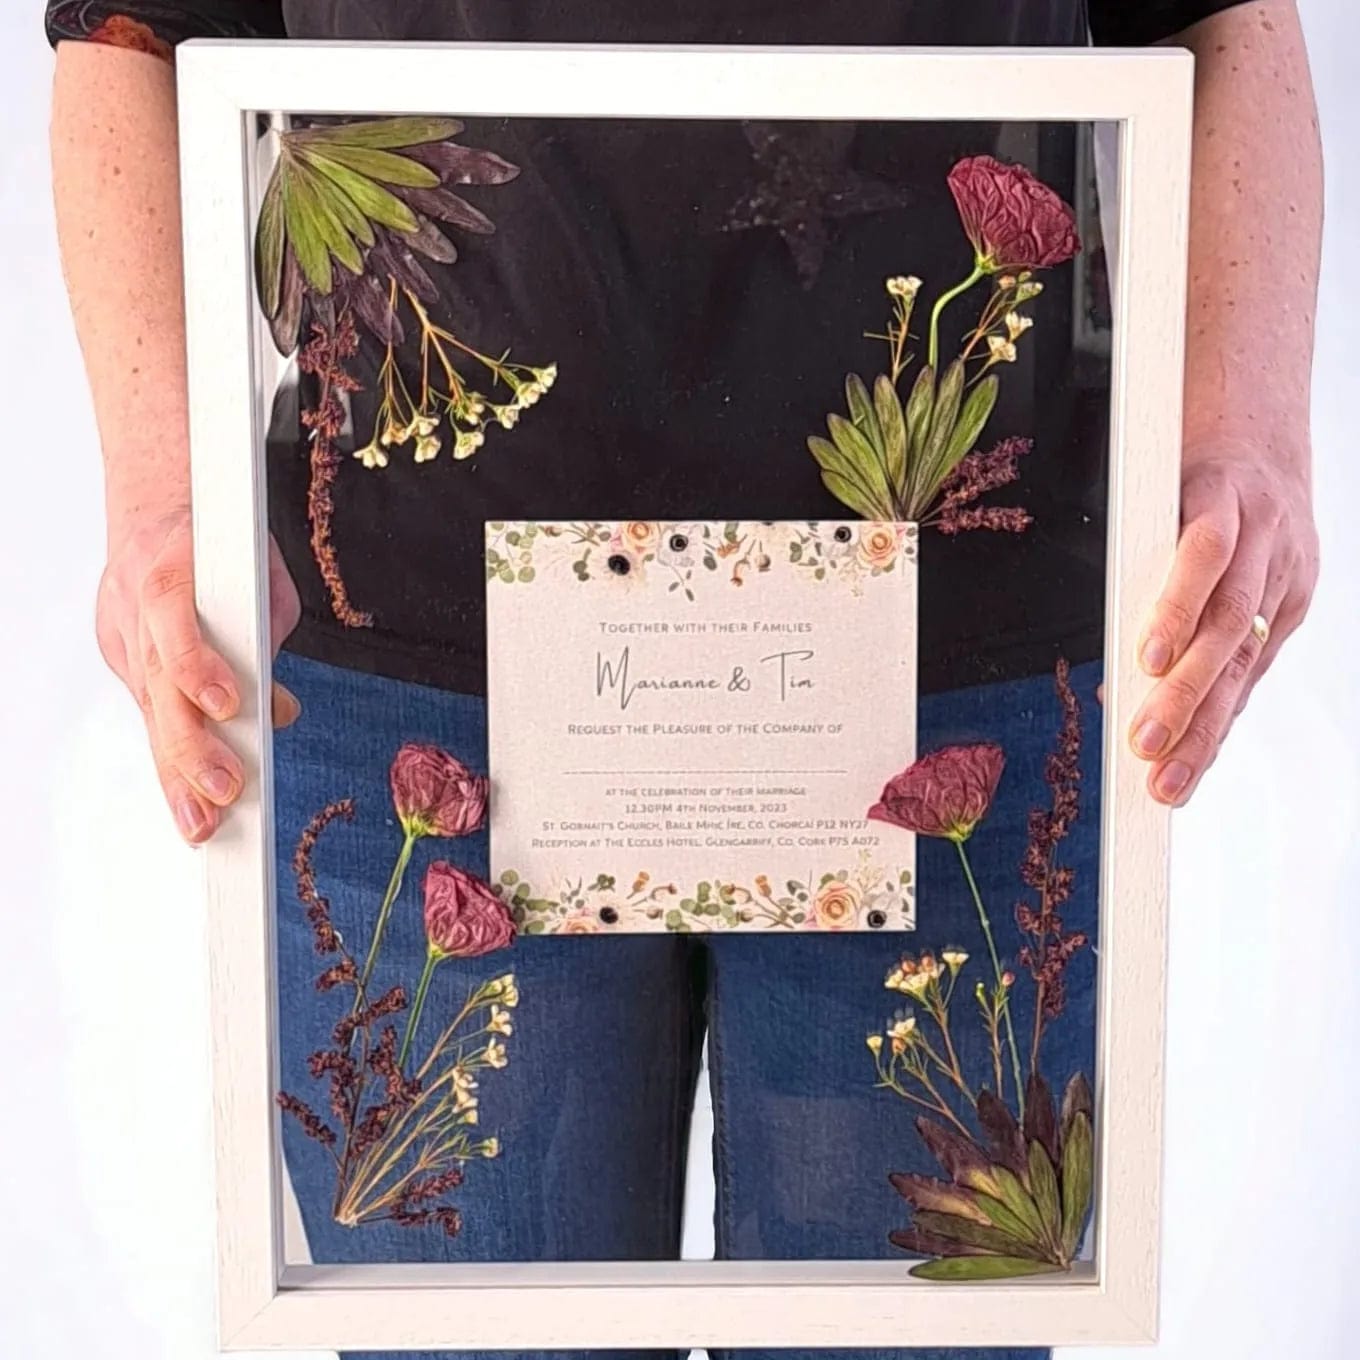 SIÓG Botanicals Pressed on Glass: A2 with Invite